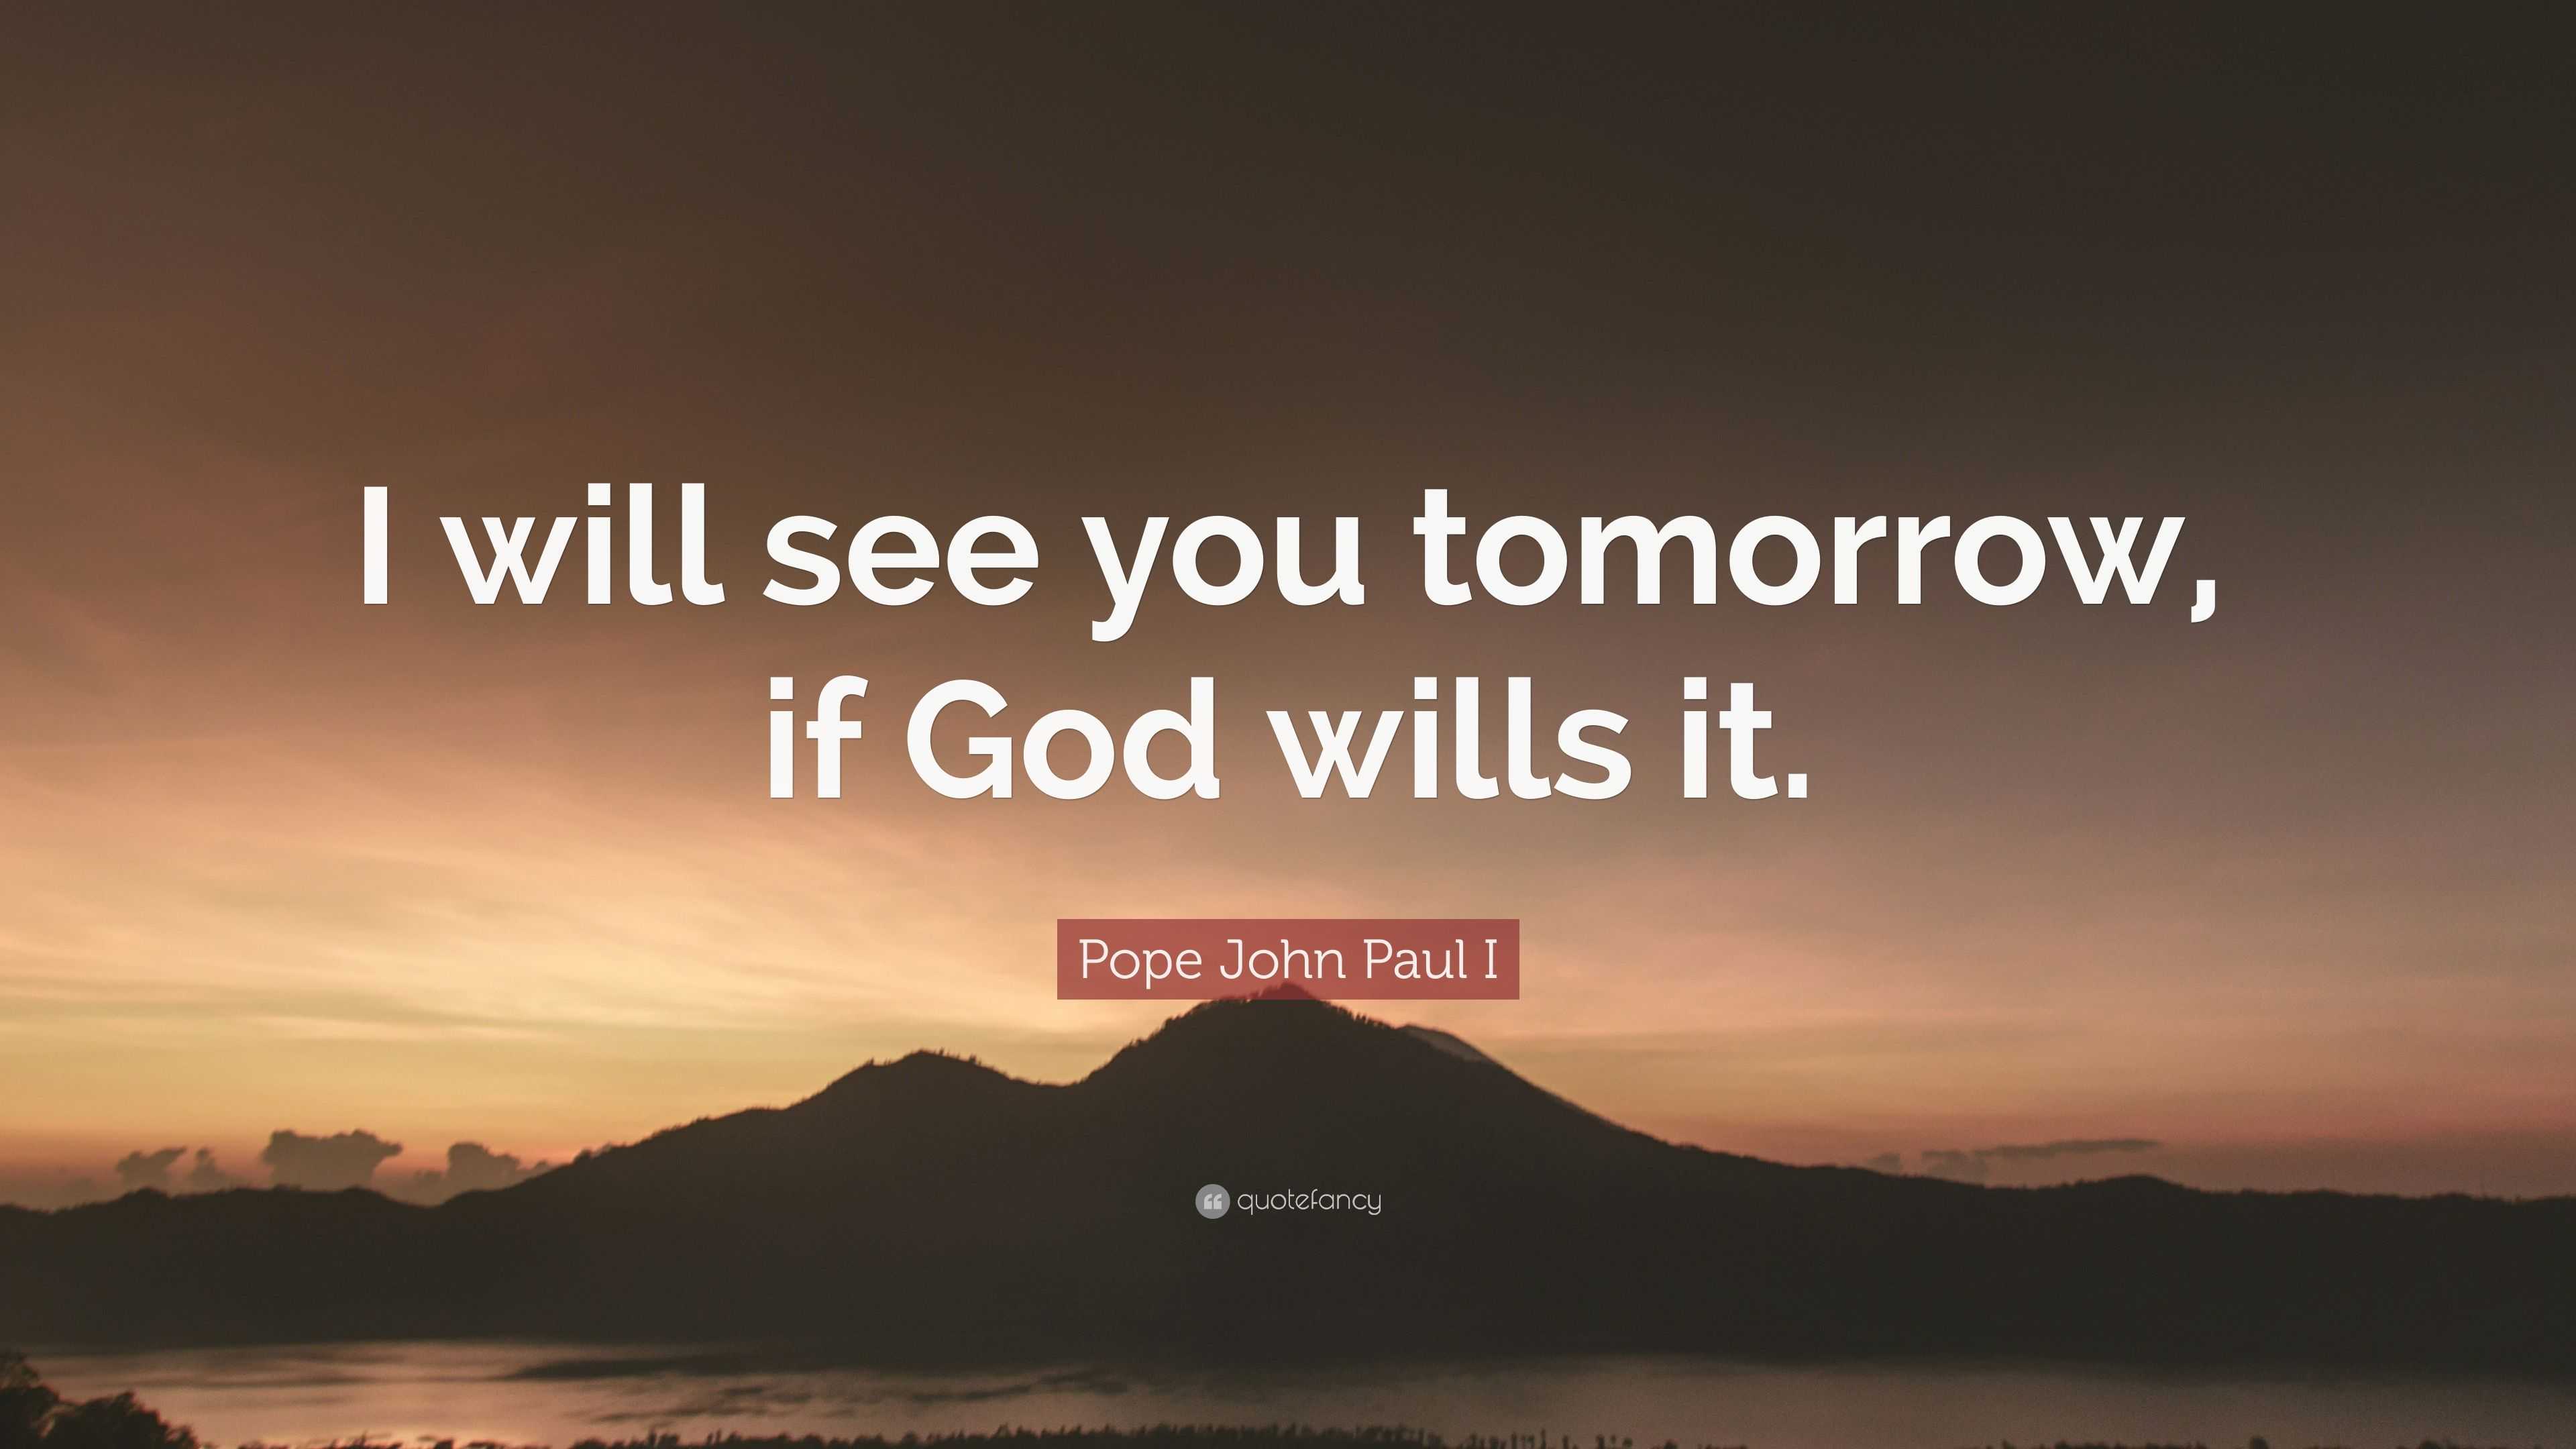 Pope John Paul I Quote: “I will see you tomorrow, if God wills it.”